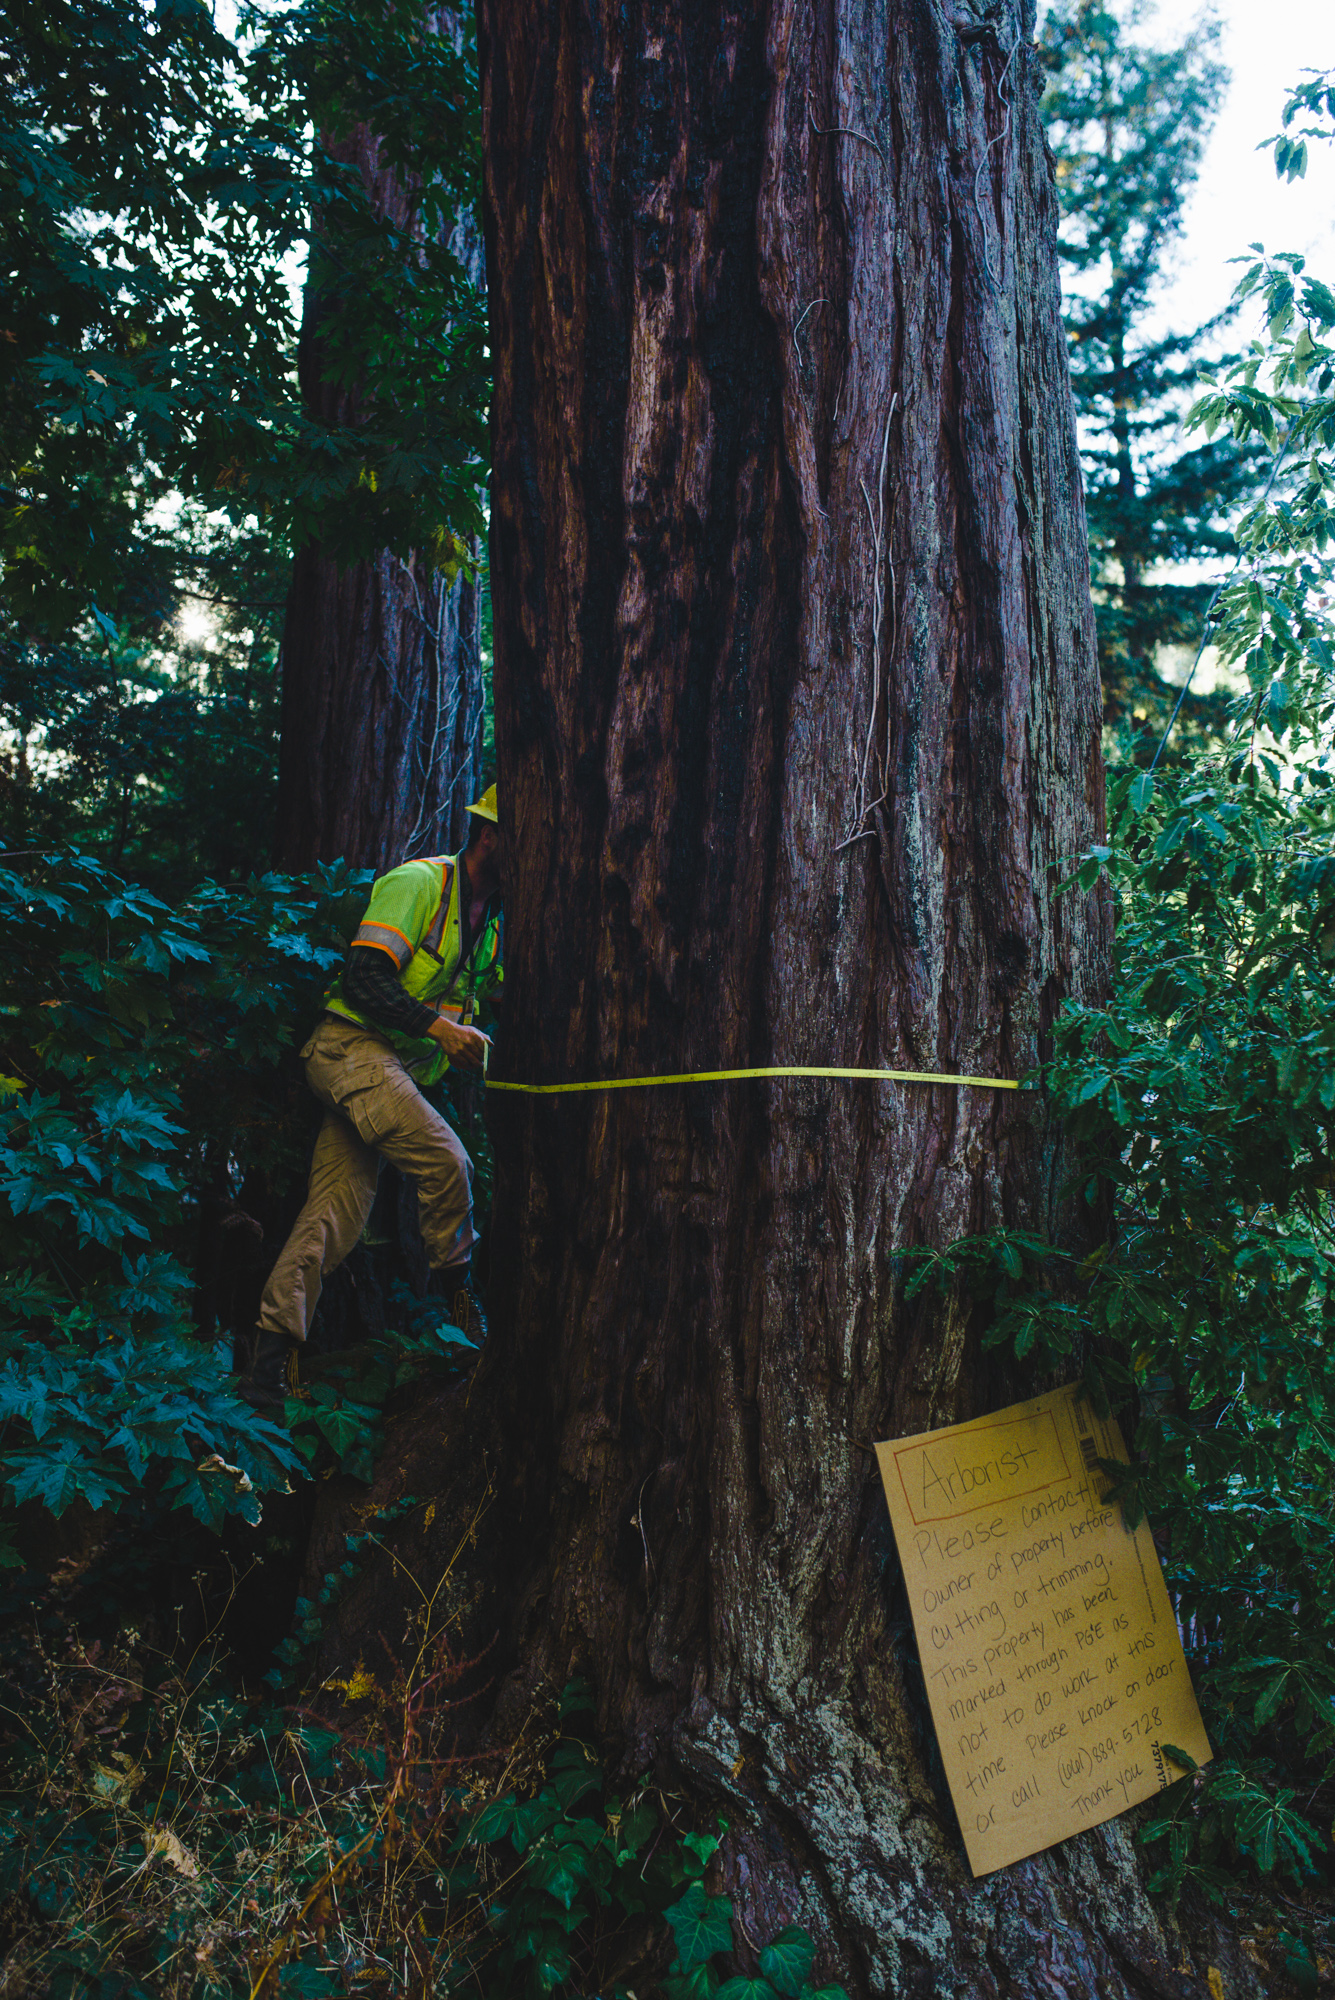  Arborist measures large coast redwood tree, at the request of property owner.  Determines this tree was mis-marked and should not be taken down. 